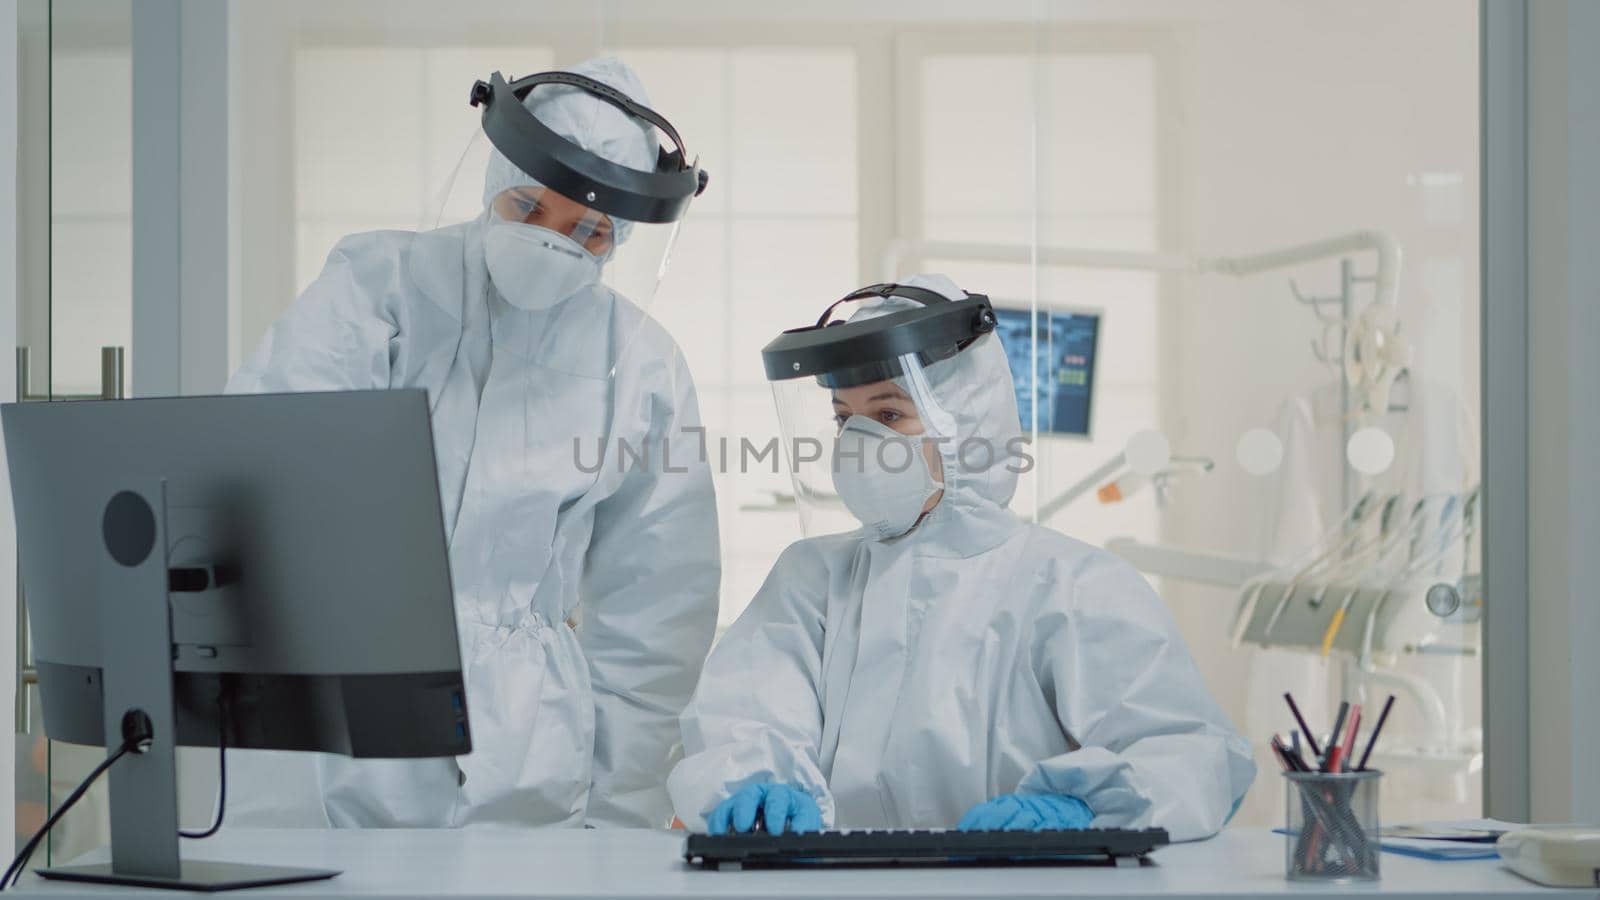 Dentistry team of specialists with ppe suits using computer by DCStudio